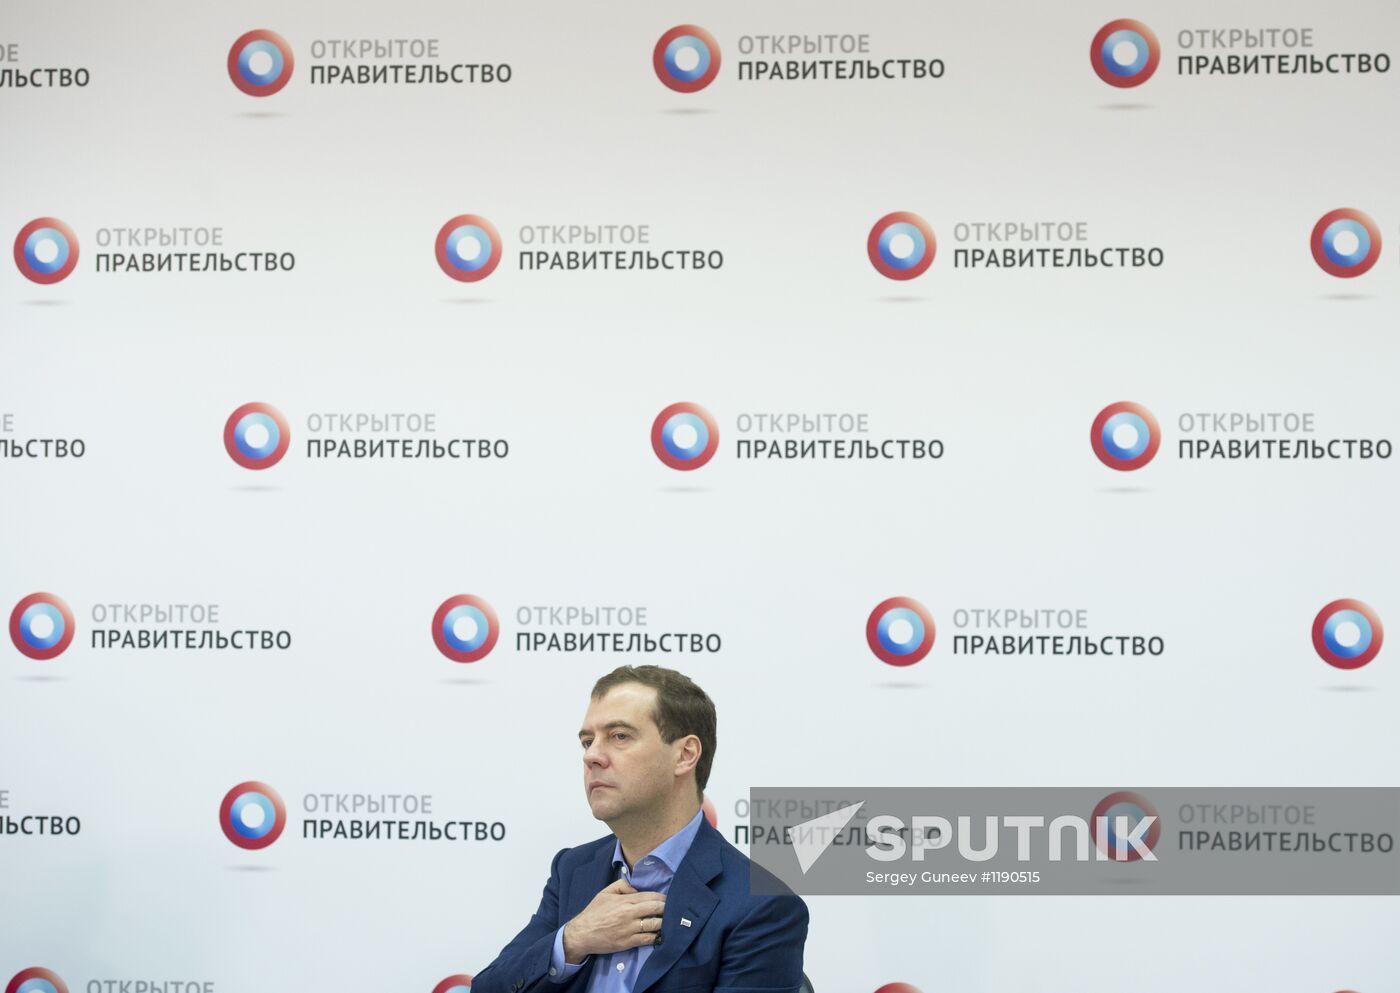 Dmitry Medvedev during Open Government meeting